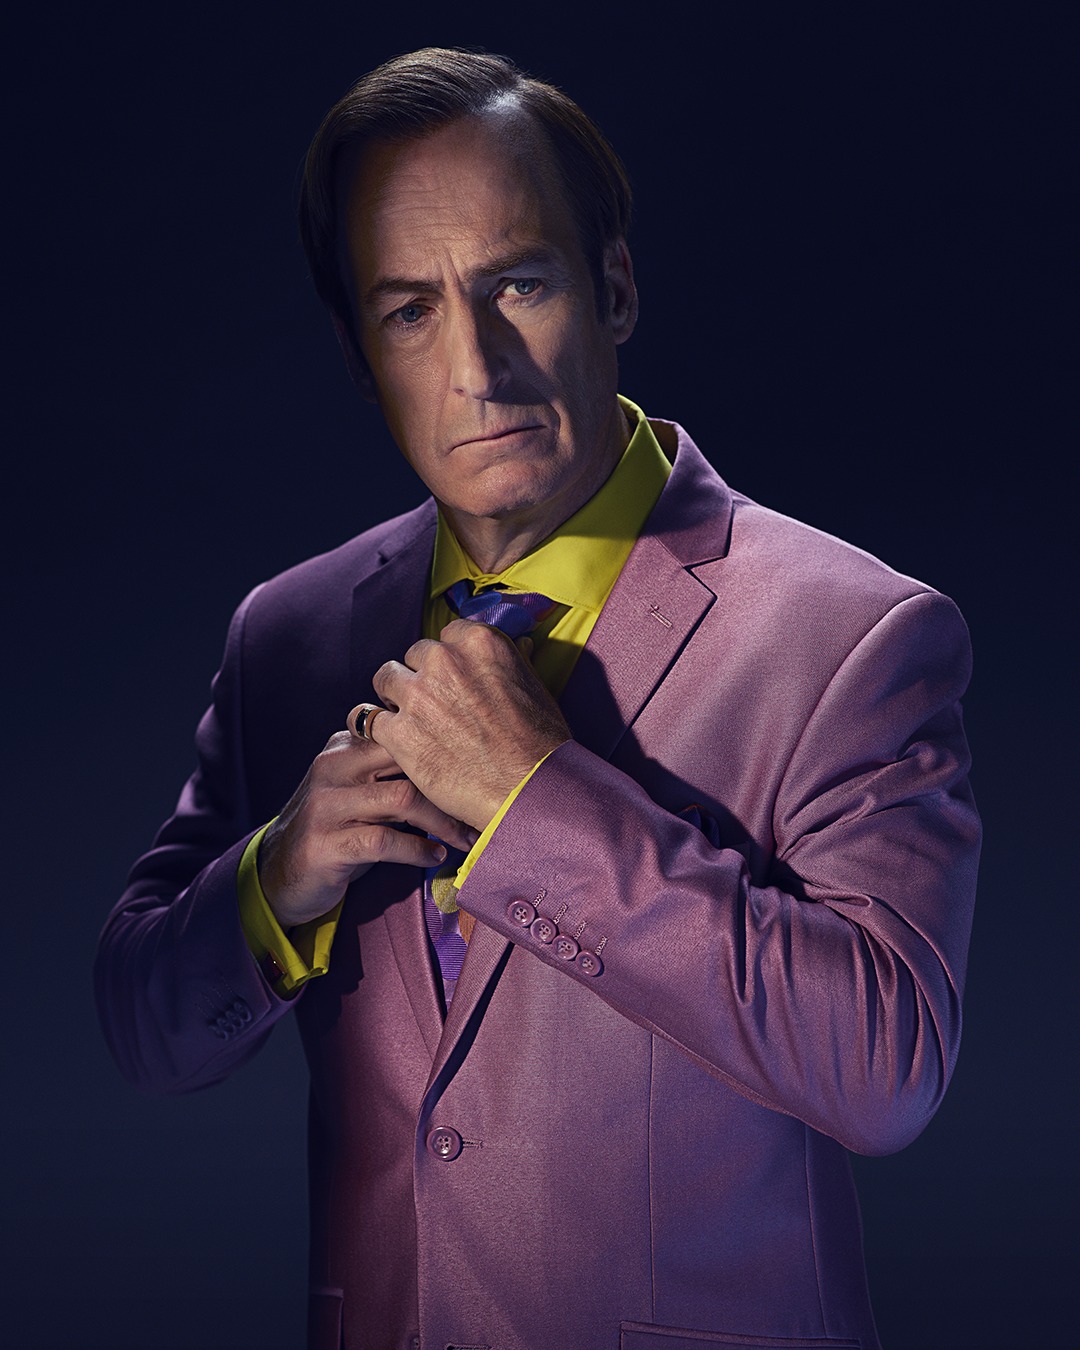 1 hour of 3D Saul Goodman to slowly lose your sanity over (3D) on Make a GIF